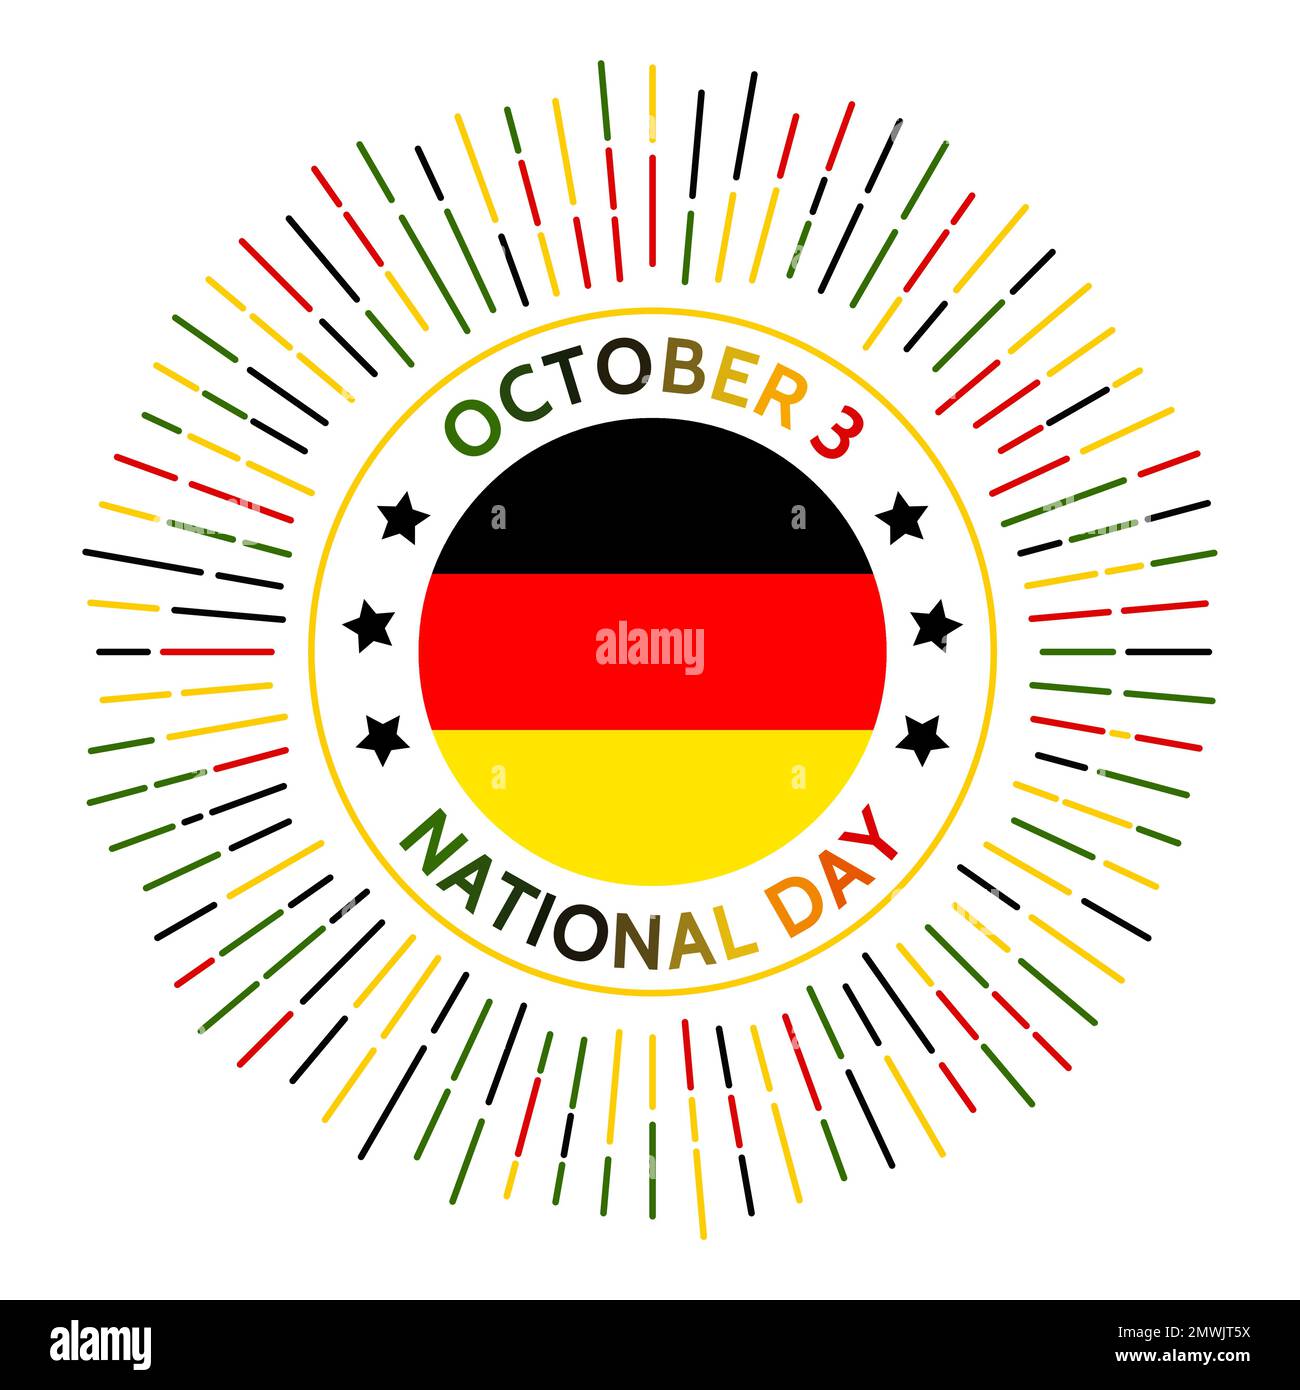 Germany national day badge. Federal Republic of Germany and the Democratic Republic united on October 3, 1990. Celebrated on October 3. Stock Vector